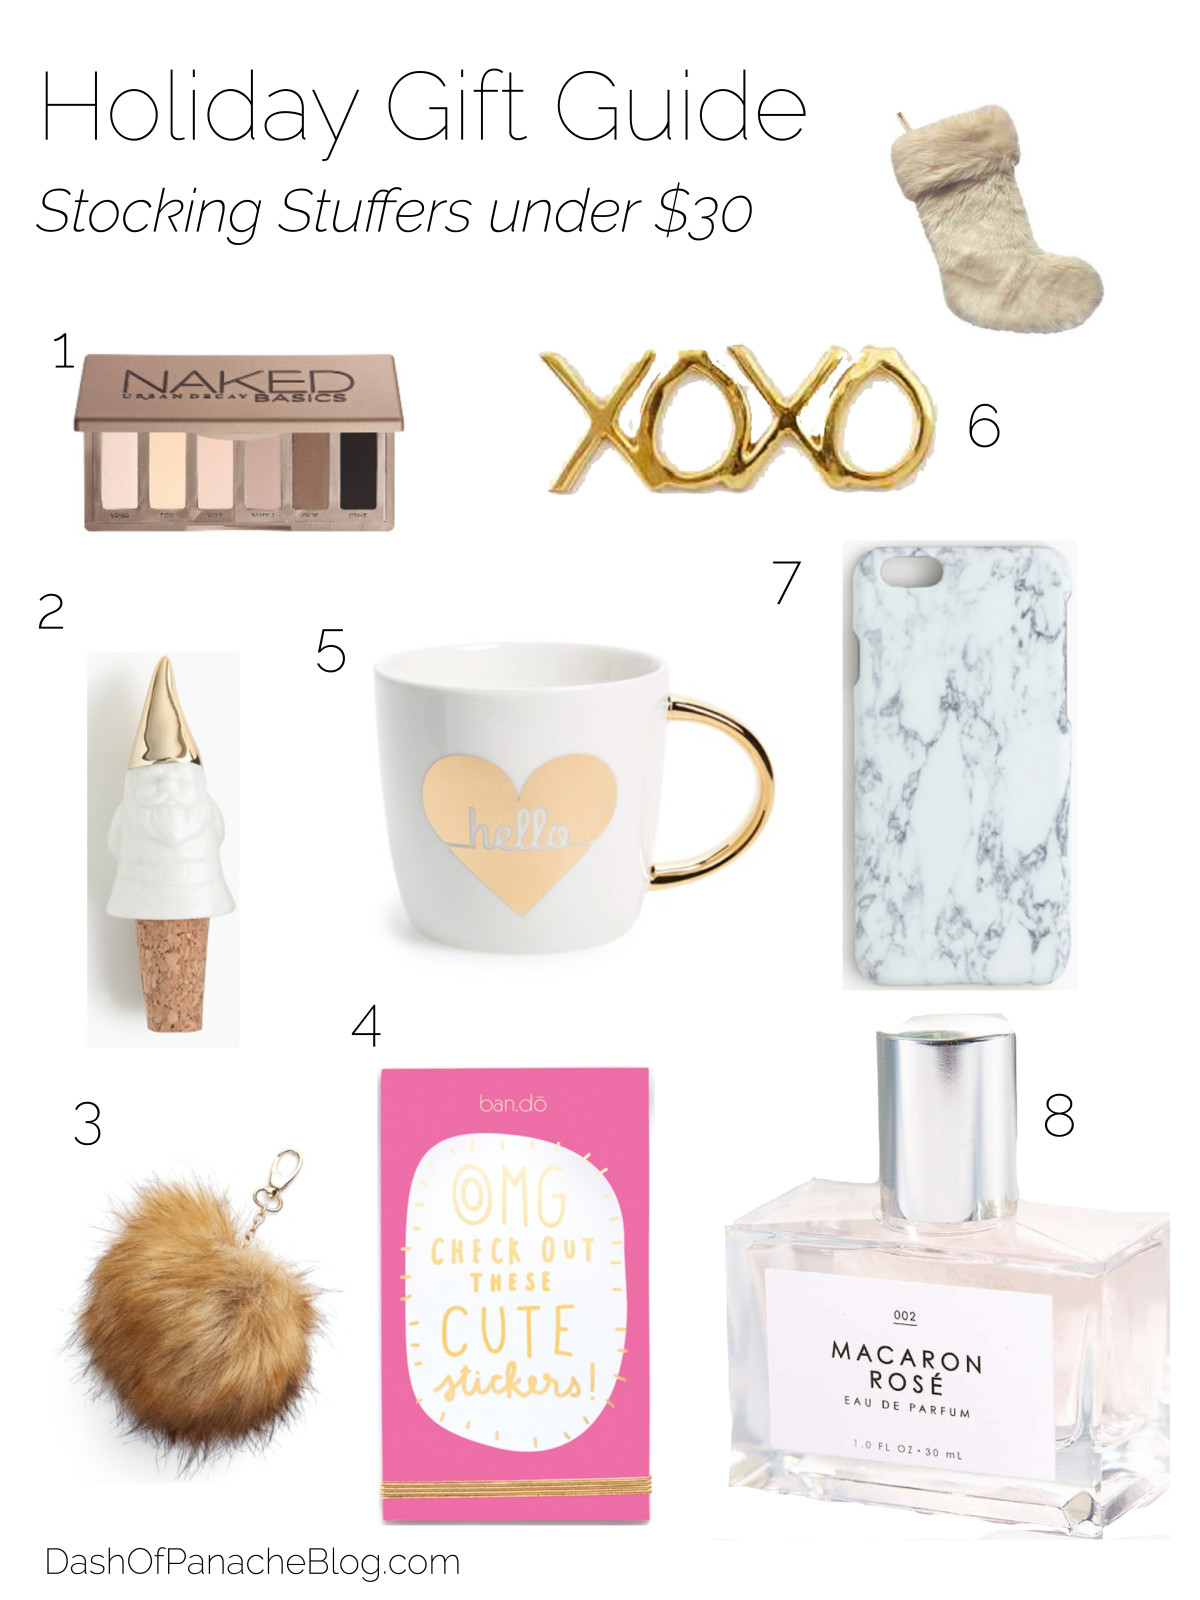 Holiday gift guide - stocking stuffers - miami lifestyle blogger